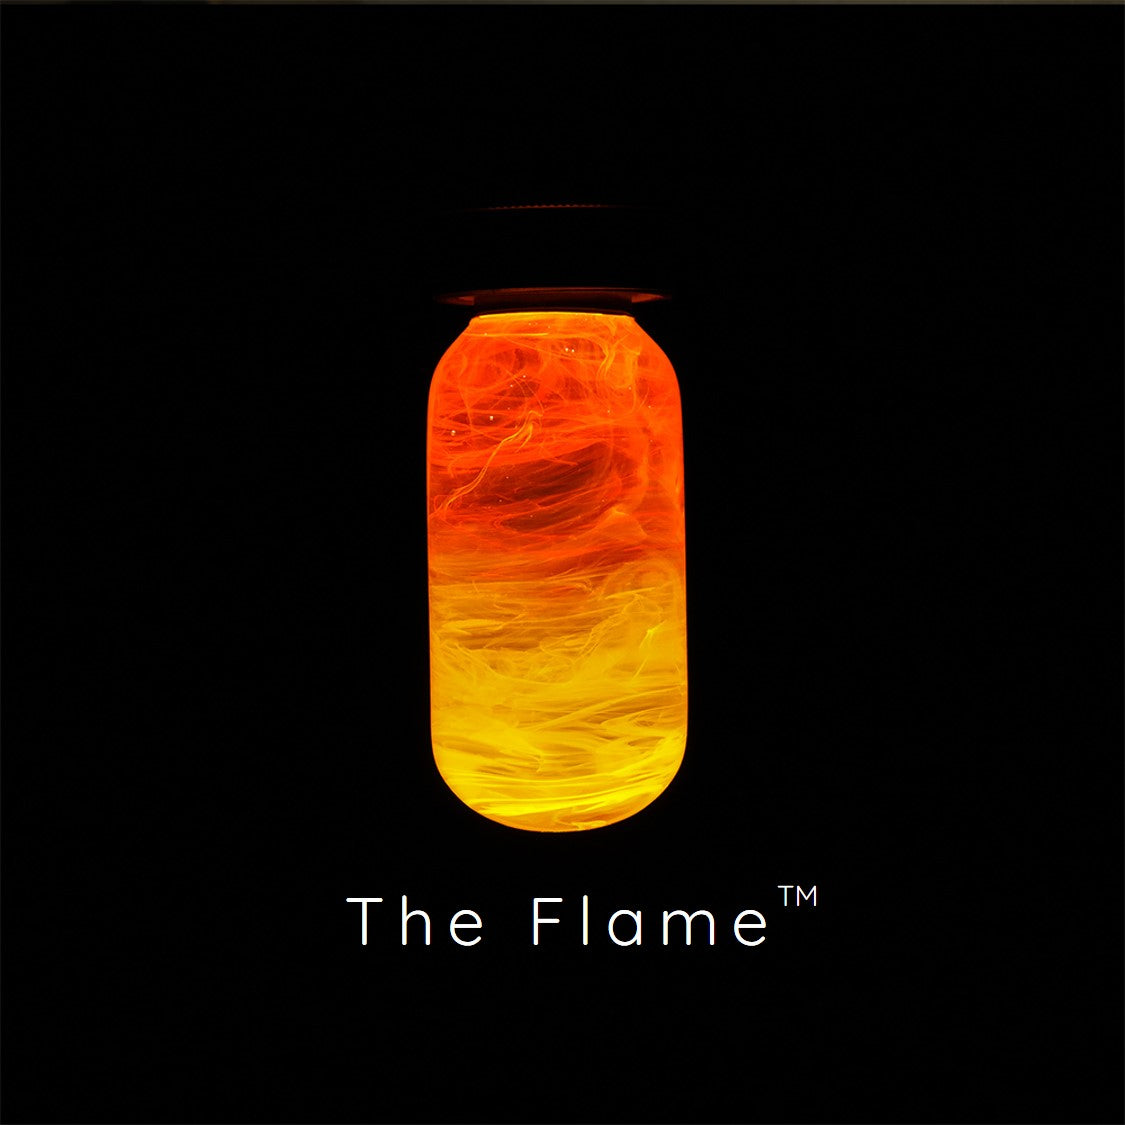 The Flame™